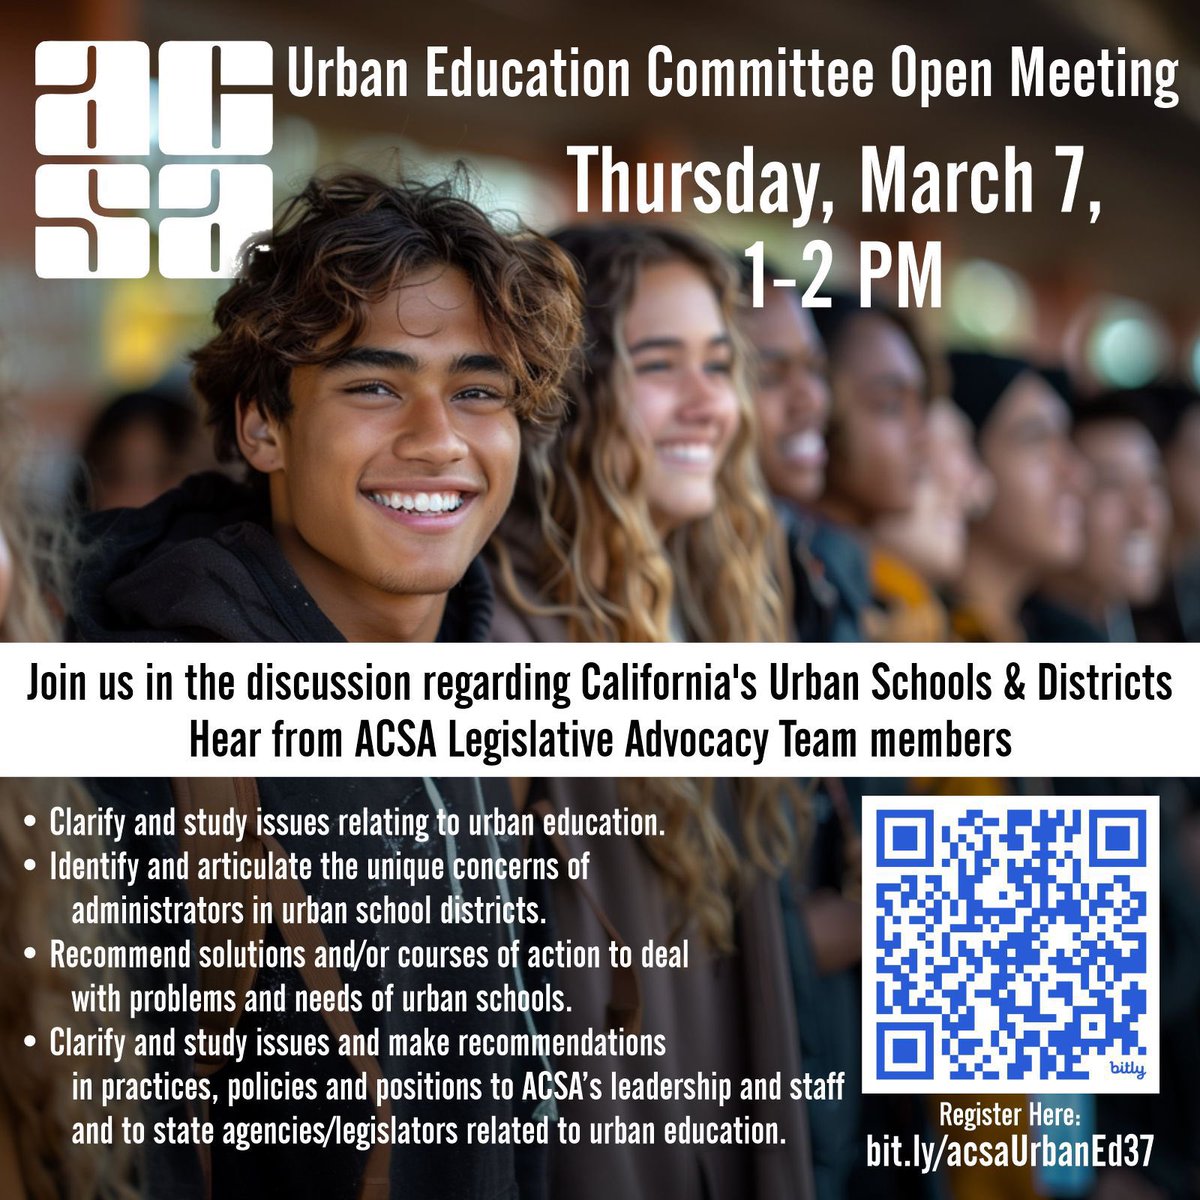 Come join us this Thursday afternoon for our virtual @ACSA_info #UrbanEdCmte Open Meeting! Register now to get the meeting link. bit.ly/acsaUrbanEd #LeadershipMatters @DrRenaeBryant @Dr_Barile @LorenaRubio123 @LeisaWinstonHBC @ACSA_GR Promo Credit & RT via @kimi_mac